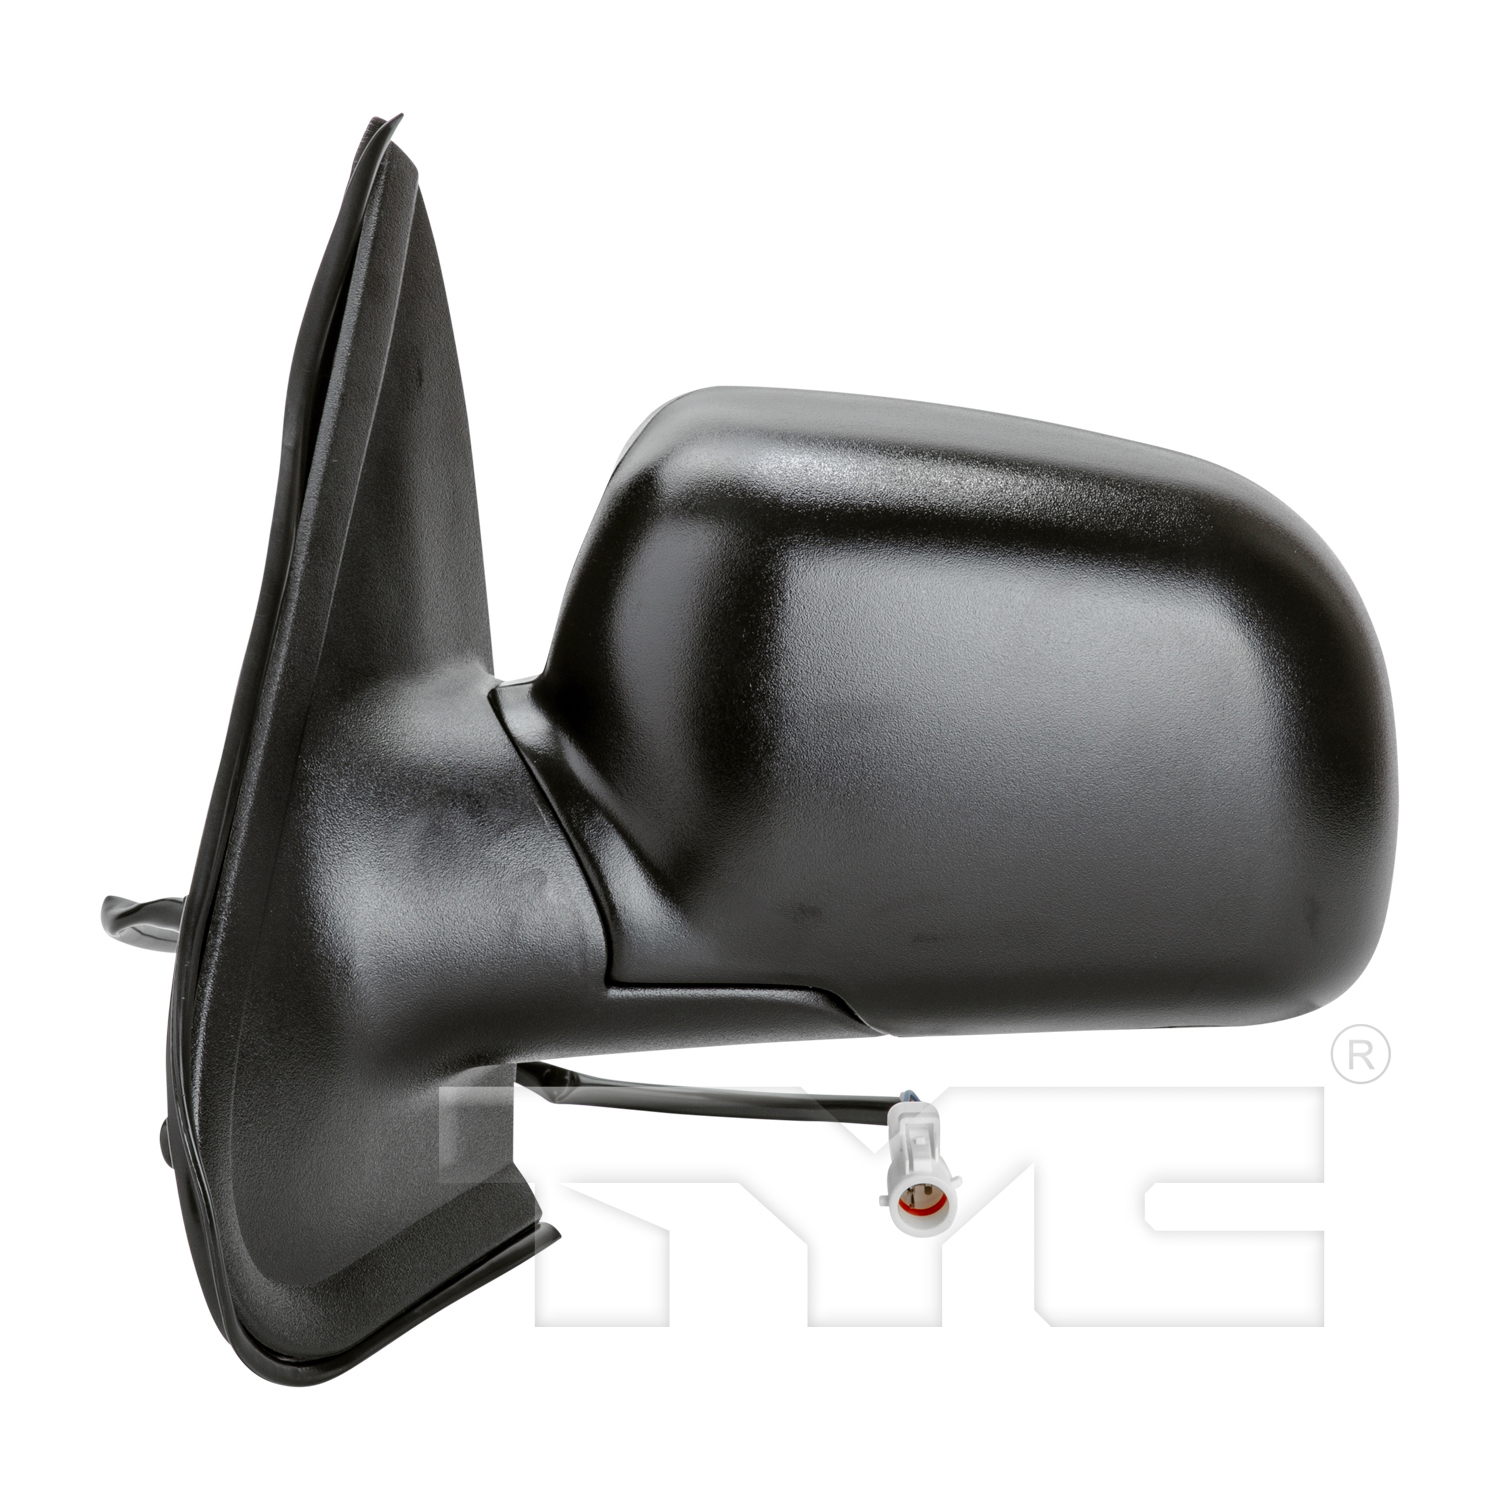 Aftermarket MIRRORS for MERCURY - MOUNTAINEER, MOUNTAINEER,97-01,LT Mirror outside rear view